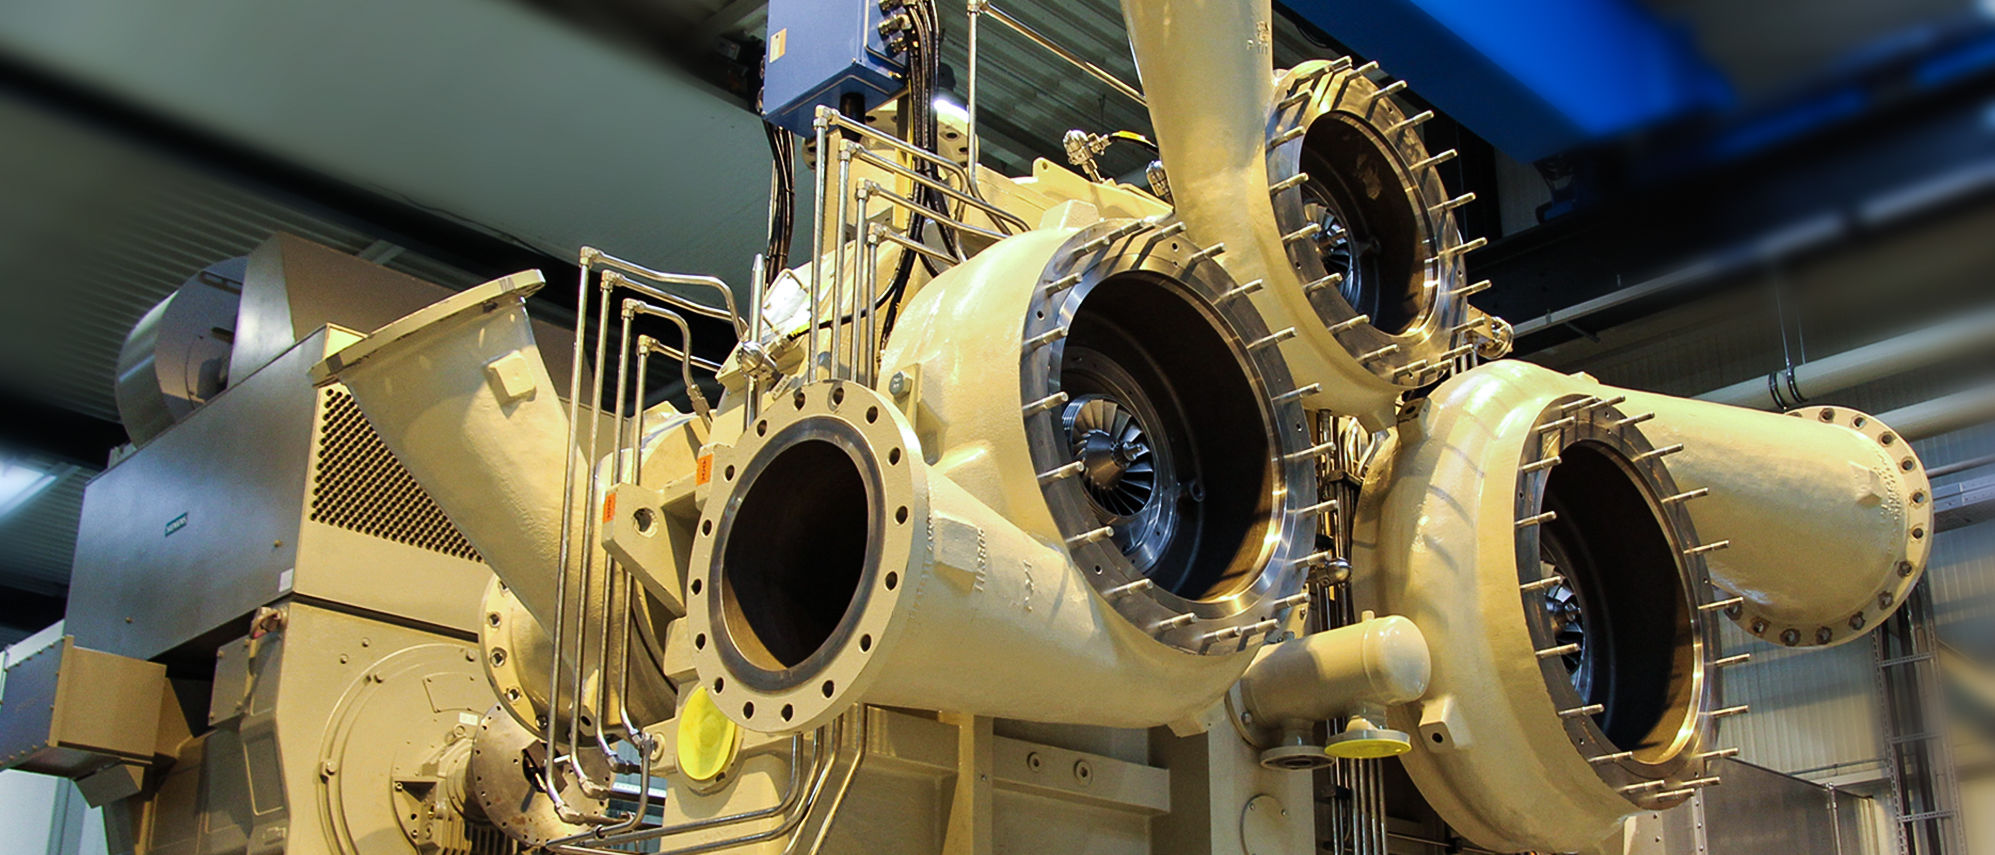 Shown is a section of a white integrally geared centrifugal compressor